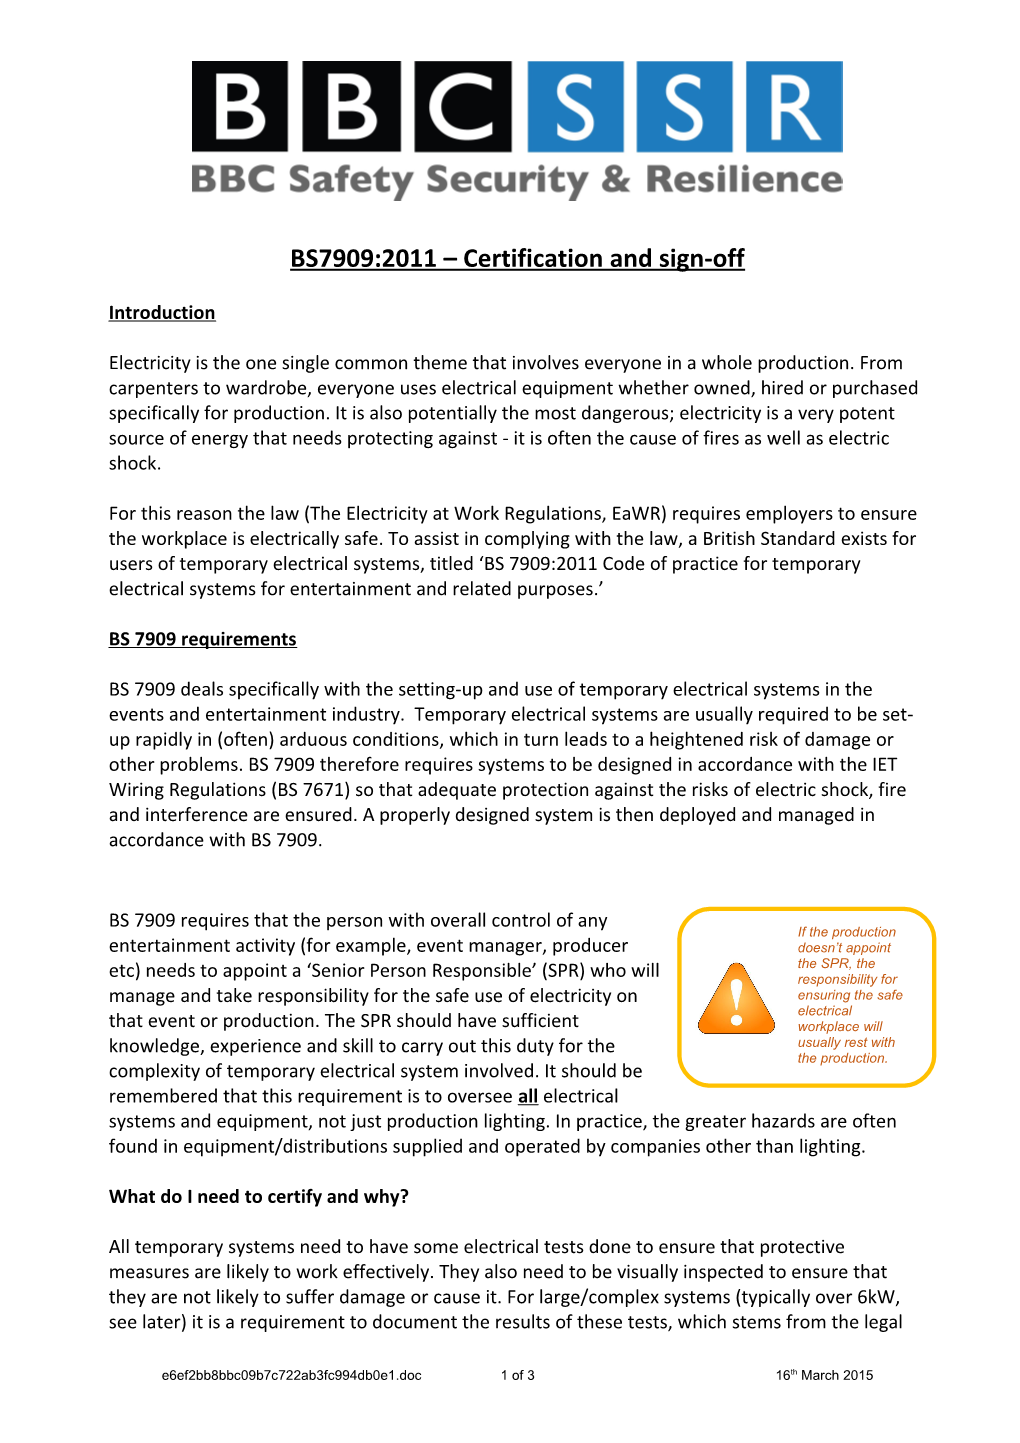 BS7909:2011 Certification and Sign-Off